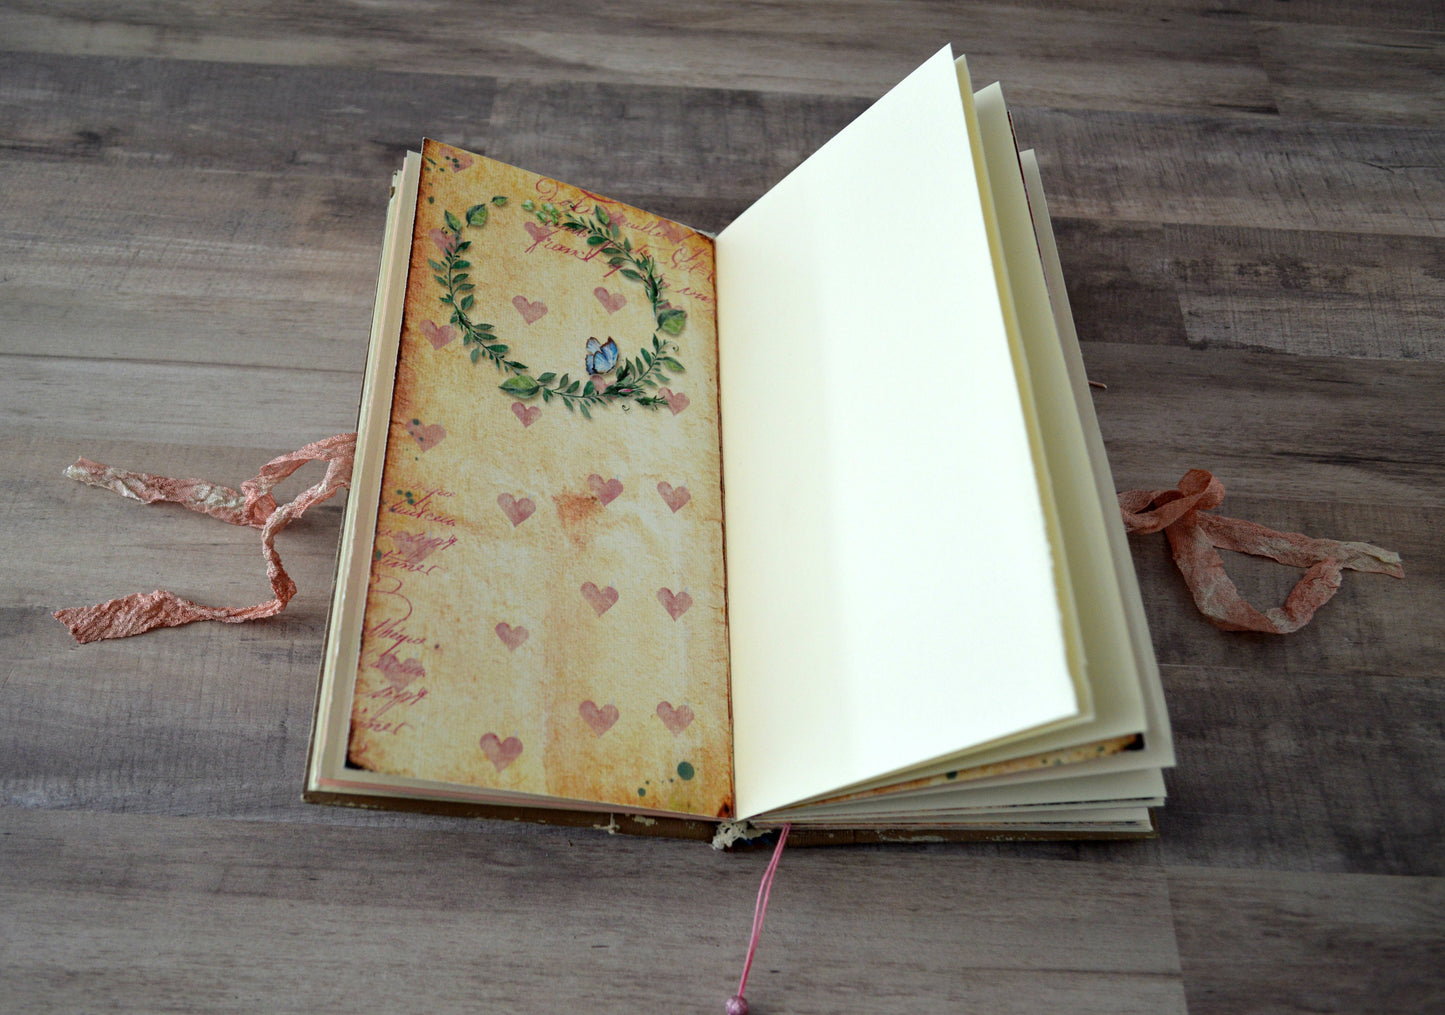 Slim Junk Journal Diary with decorated pages, Vintage Wedding Guest Book Album, Travel Journal Photo Book, Romantic Scrapbook Memory Keeping